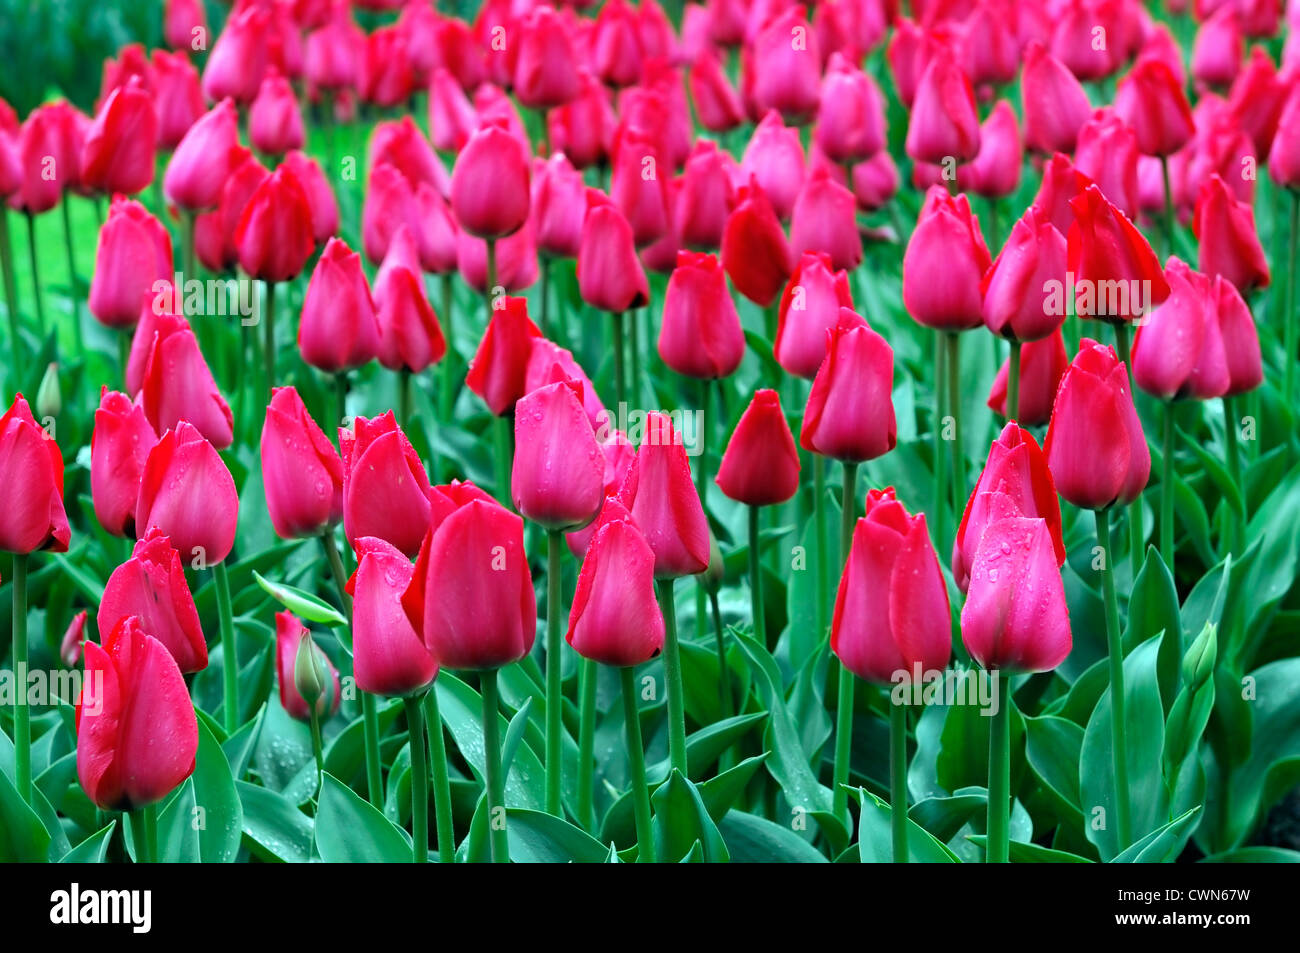 Tulipa spryng pink red triumph tulip garden flowers spring flower bloom blossom bed colour color bulb bulbous Stock Photo